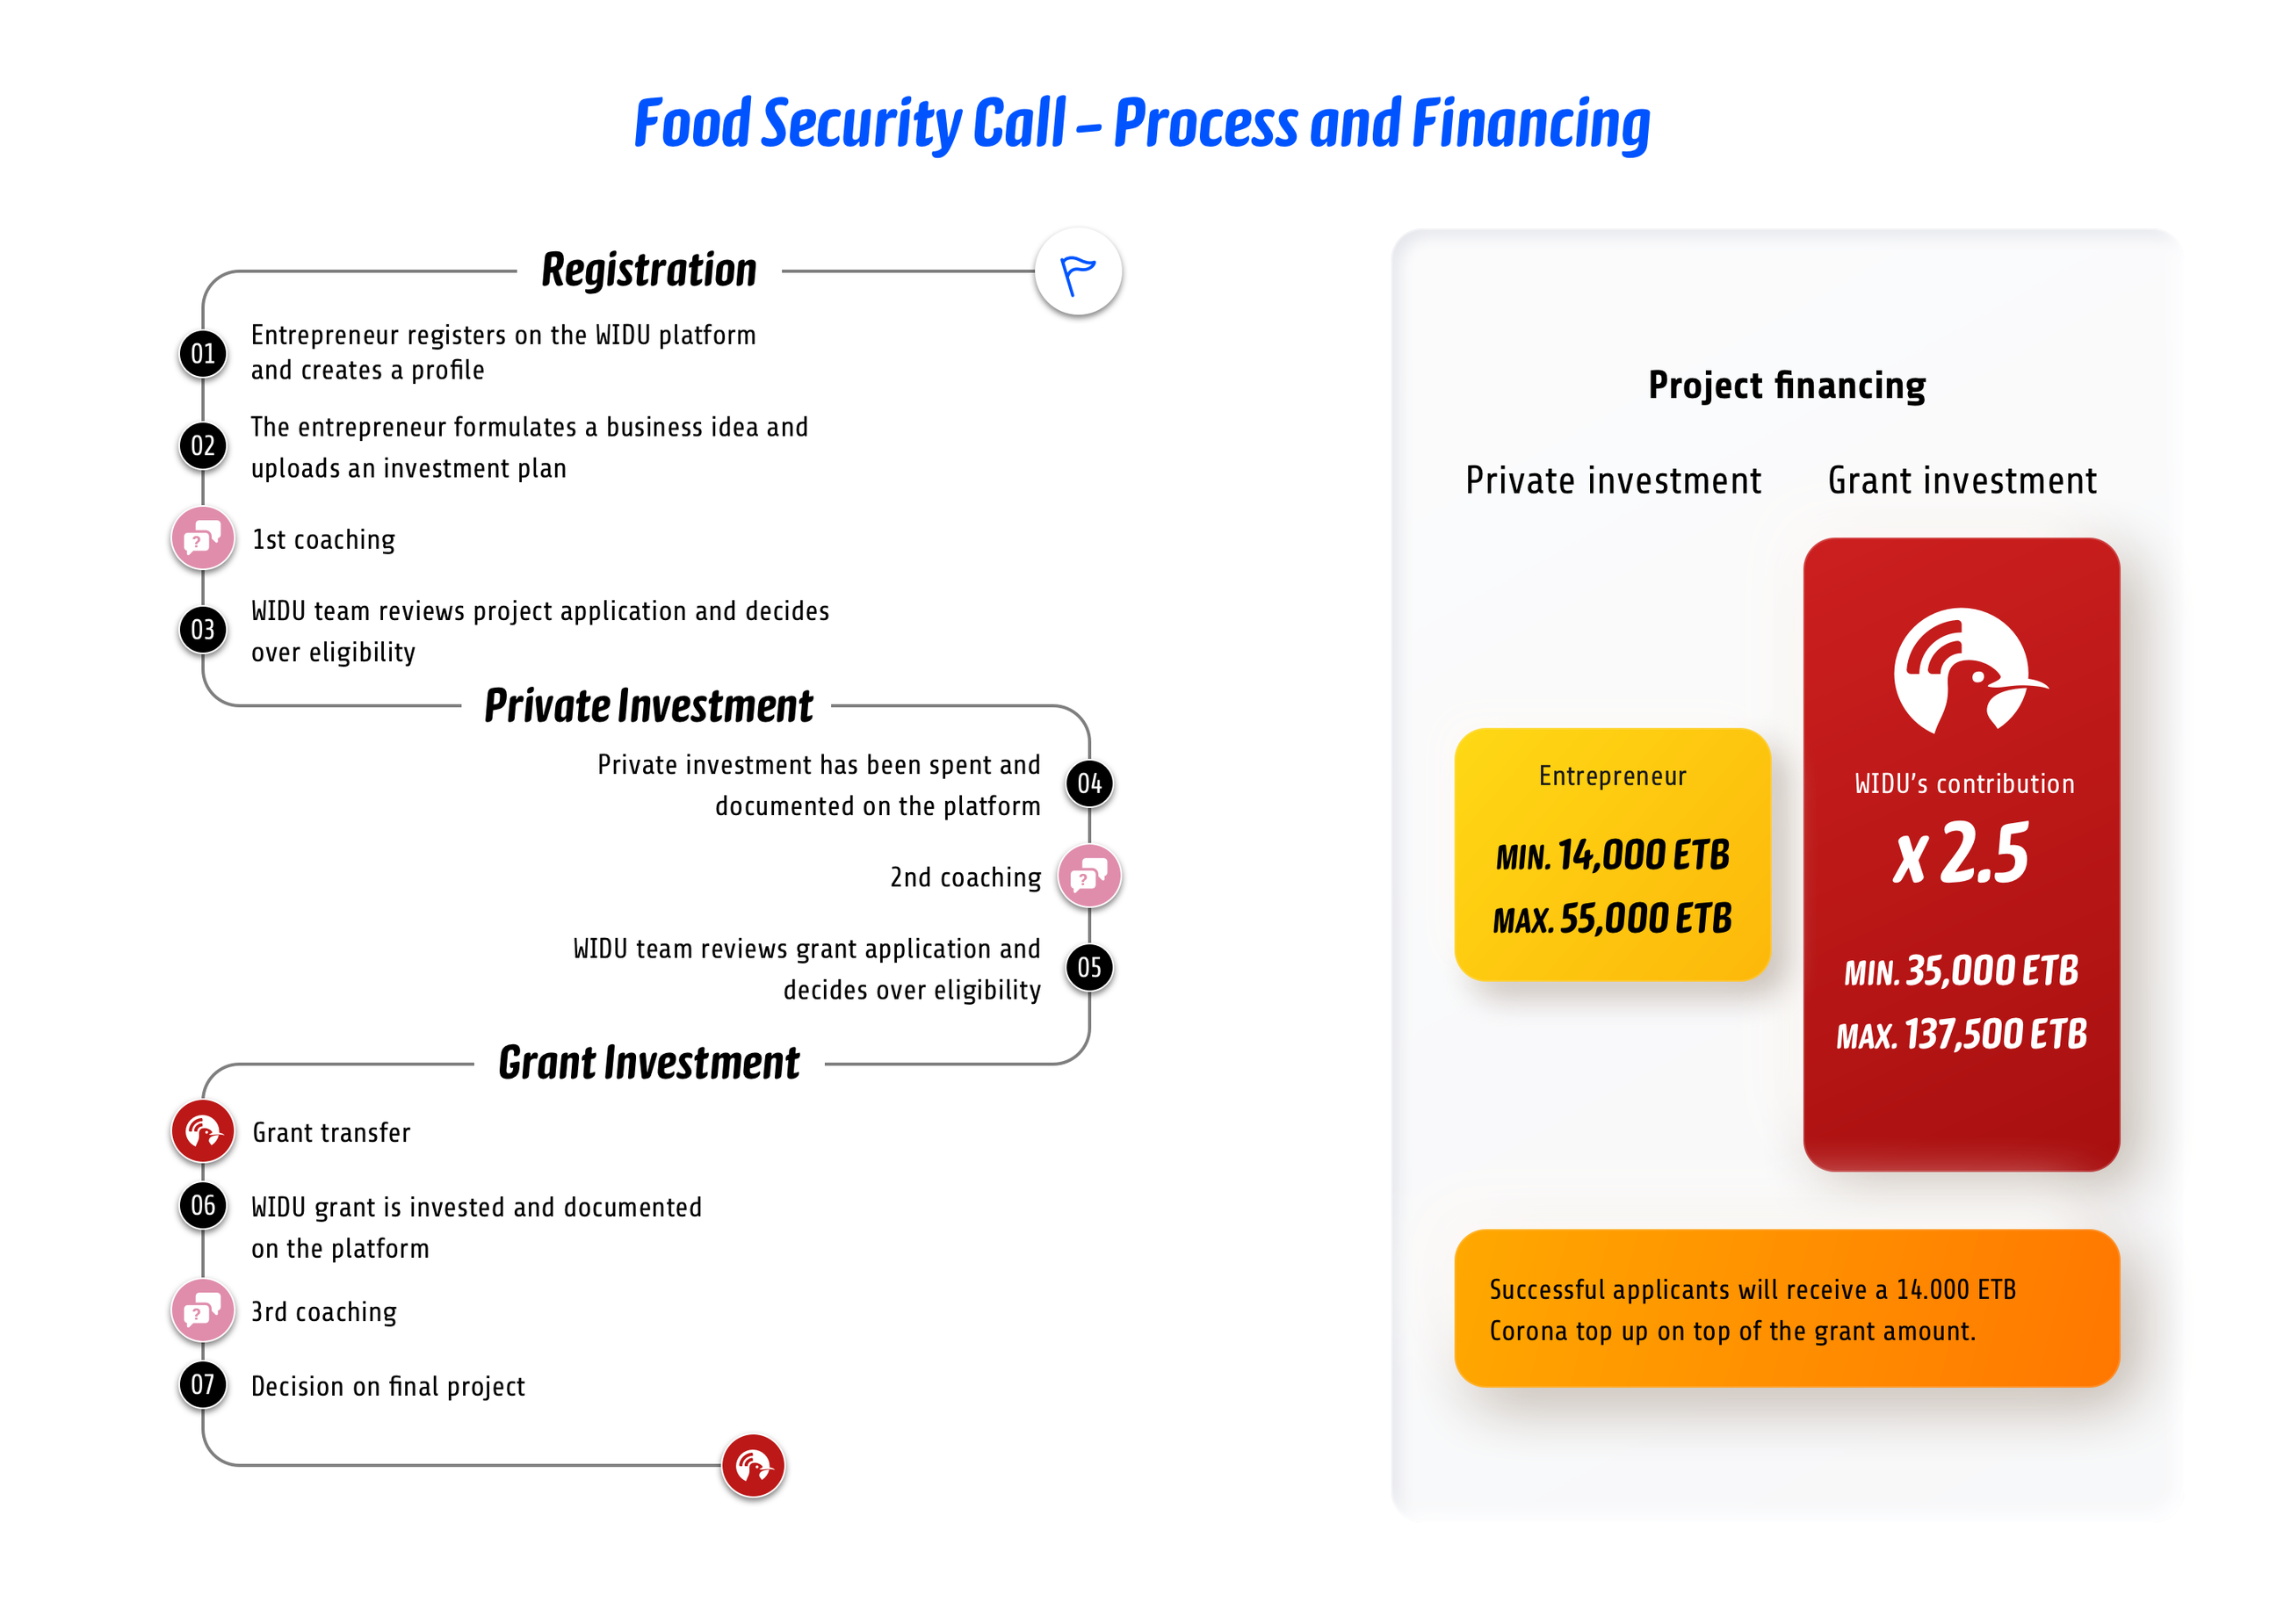 foodsecuritycall-process